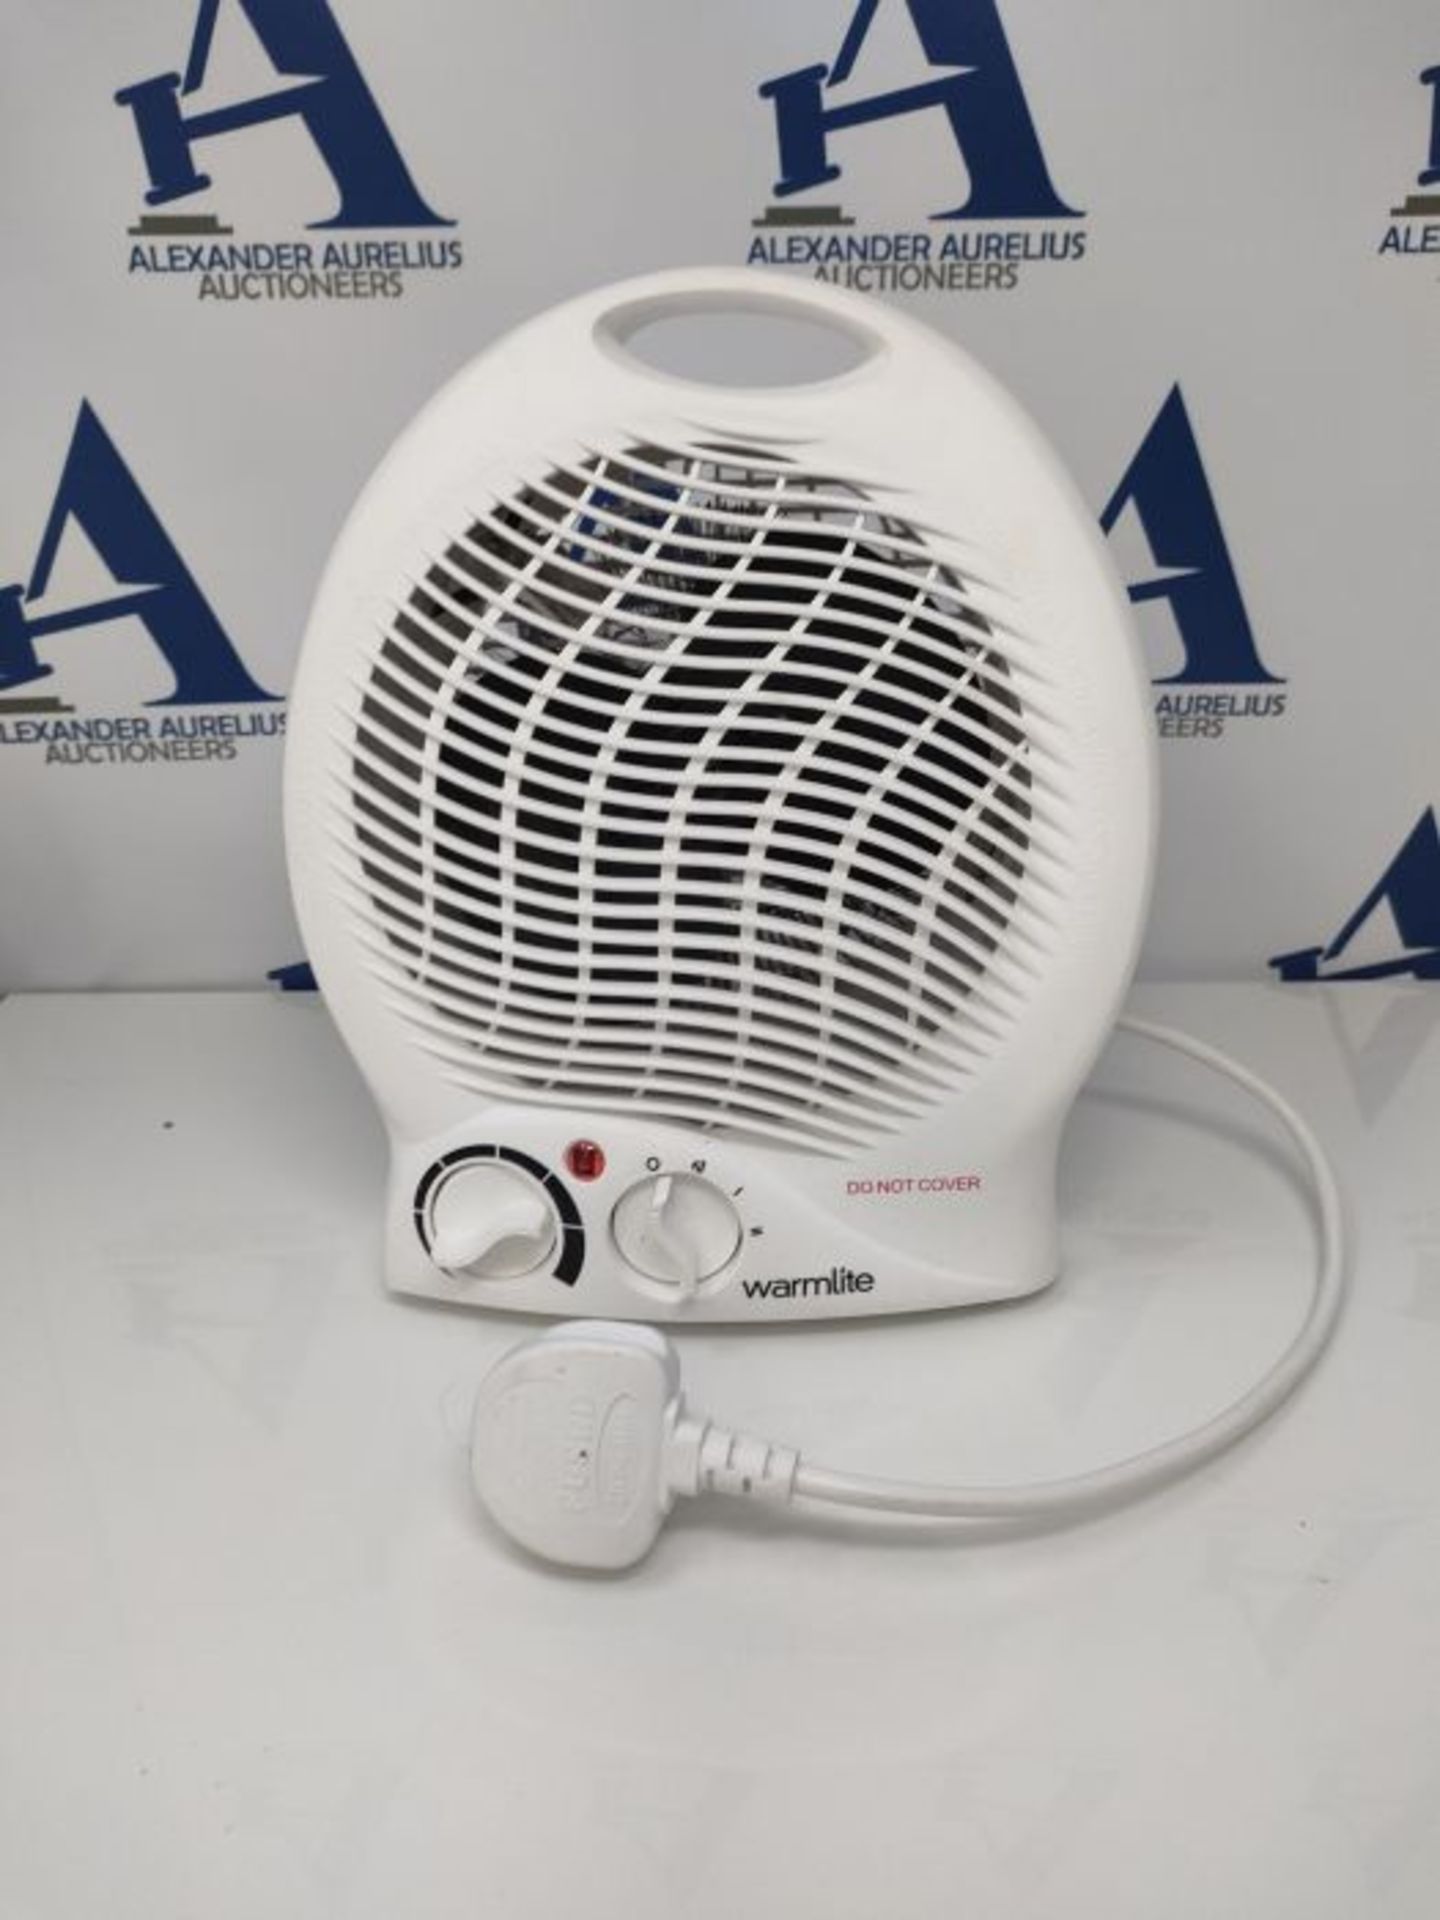 Warmlite WL44002 Thermo Fan Heater with 2 Heat Settings and Overheat Protection, 2000W - Image 3 of 3